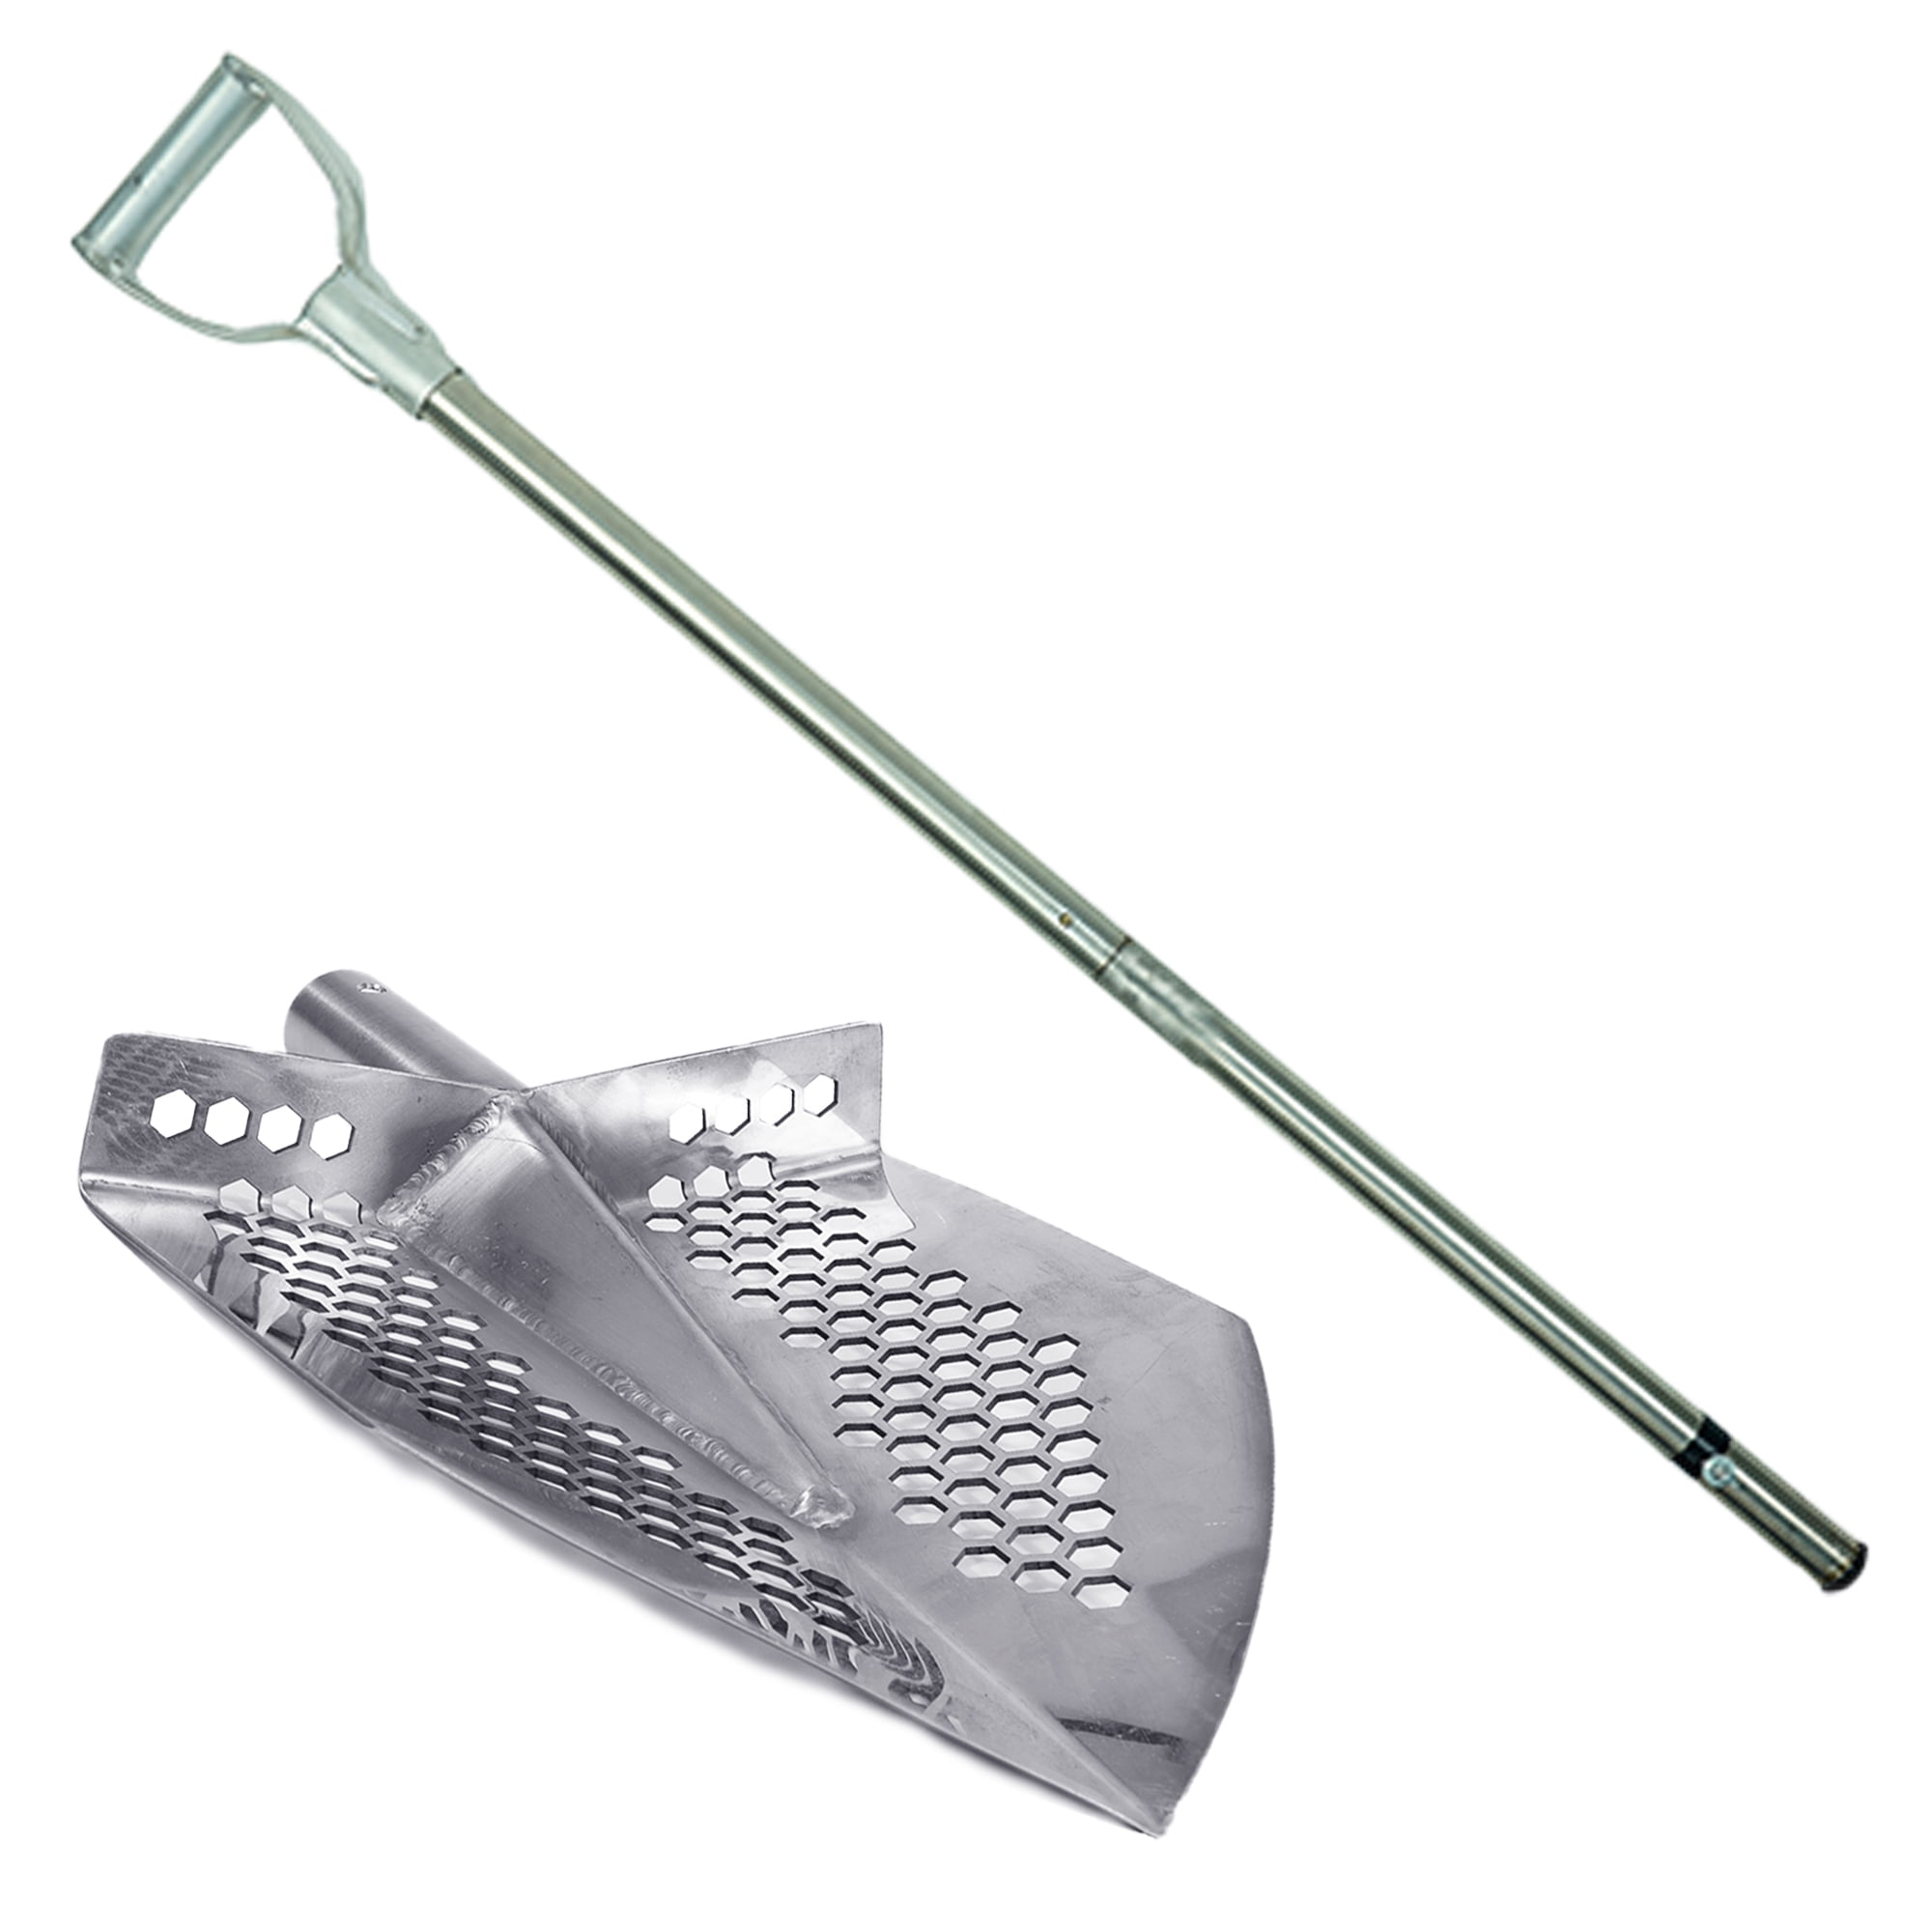 STAINLESS STEEL  Shovel Head Blade Spade Digging Big Universal Strong 2 mm  New 